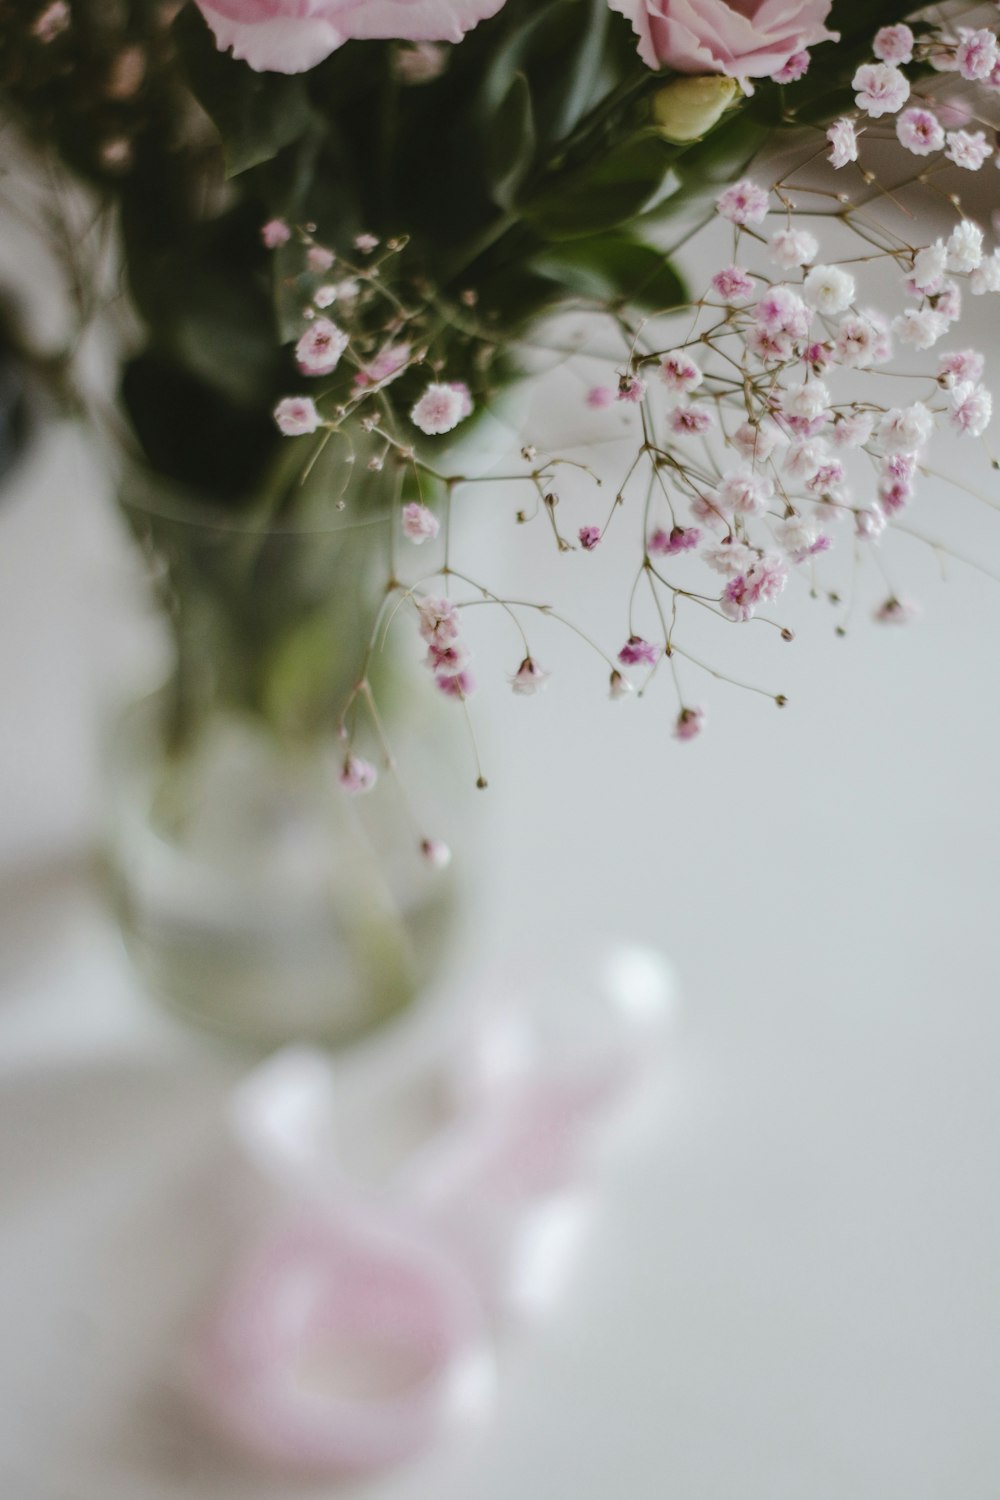 white and pink flowers in clear glass vase